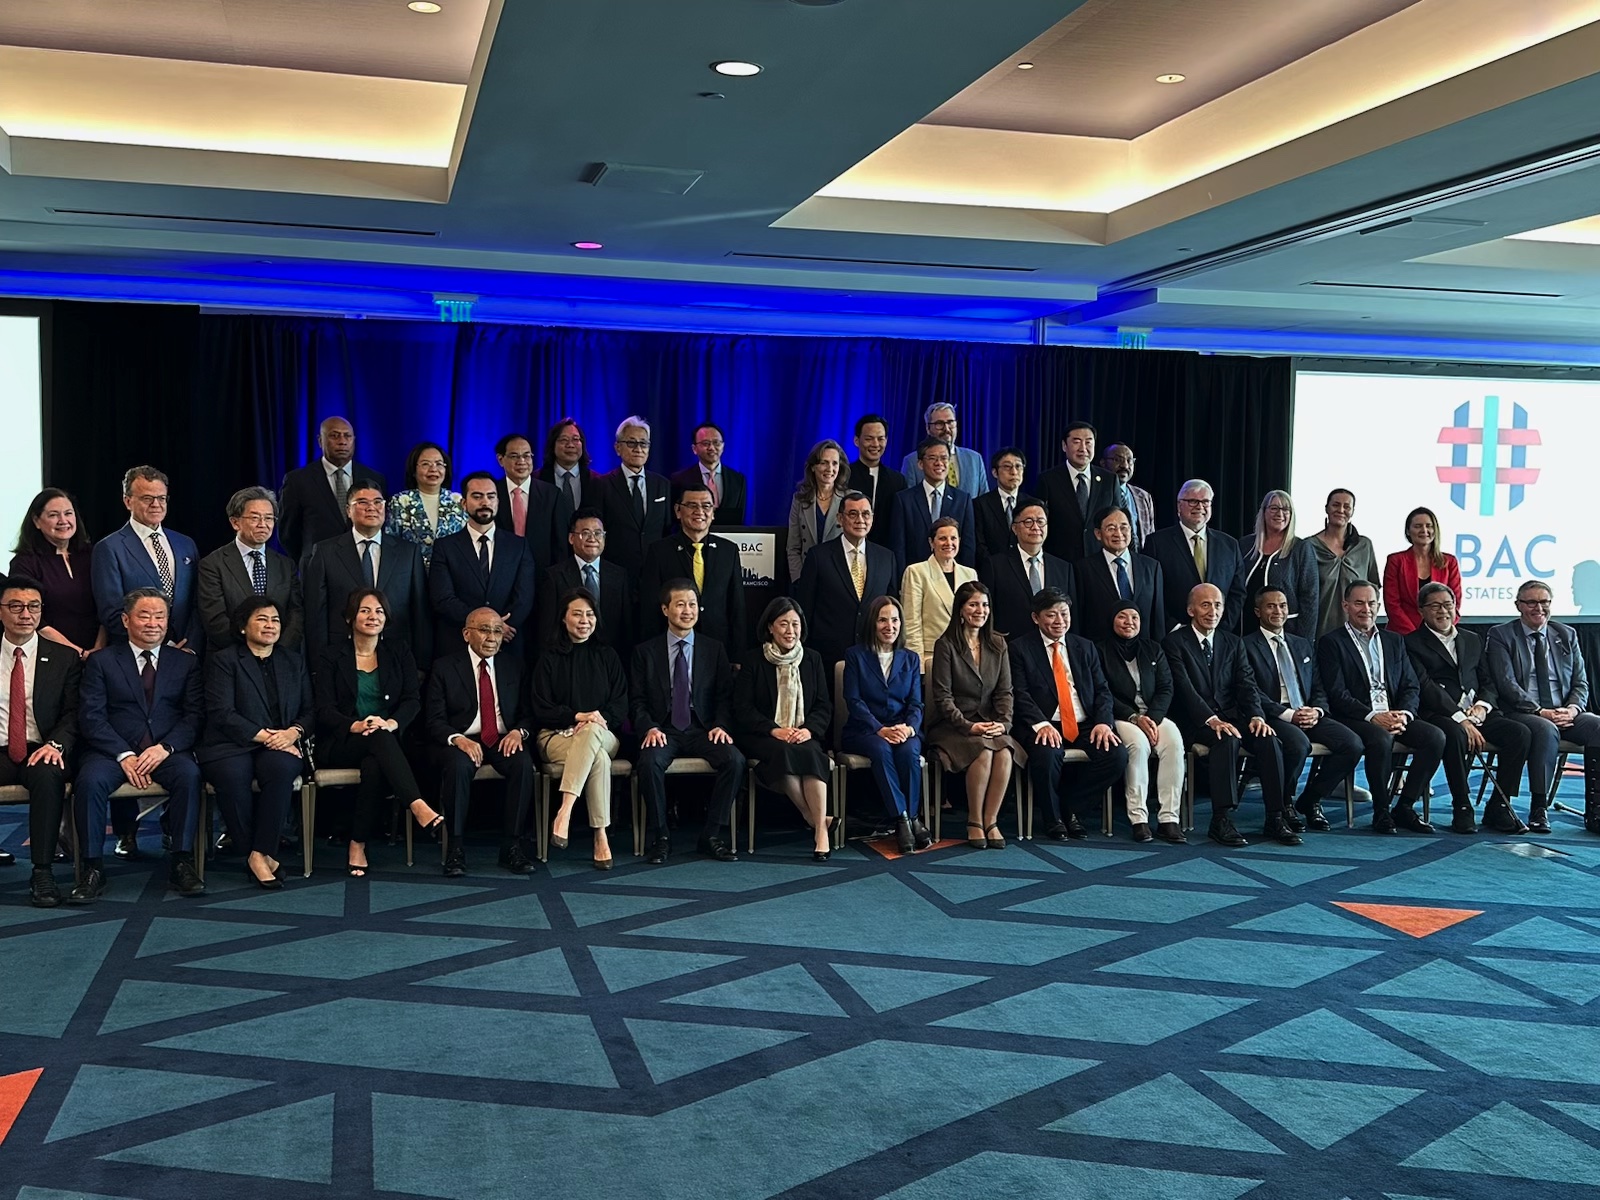 Image of Lieutenant Governor Kounalakis and other world leaders at APEC conference